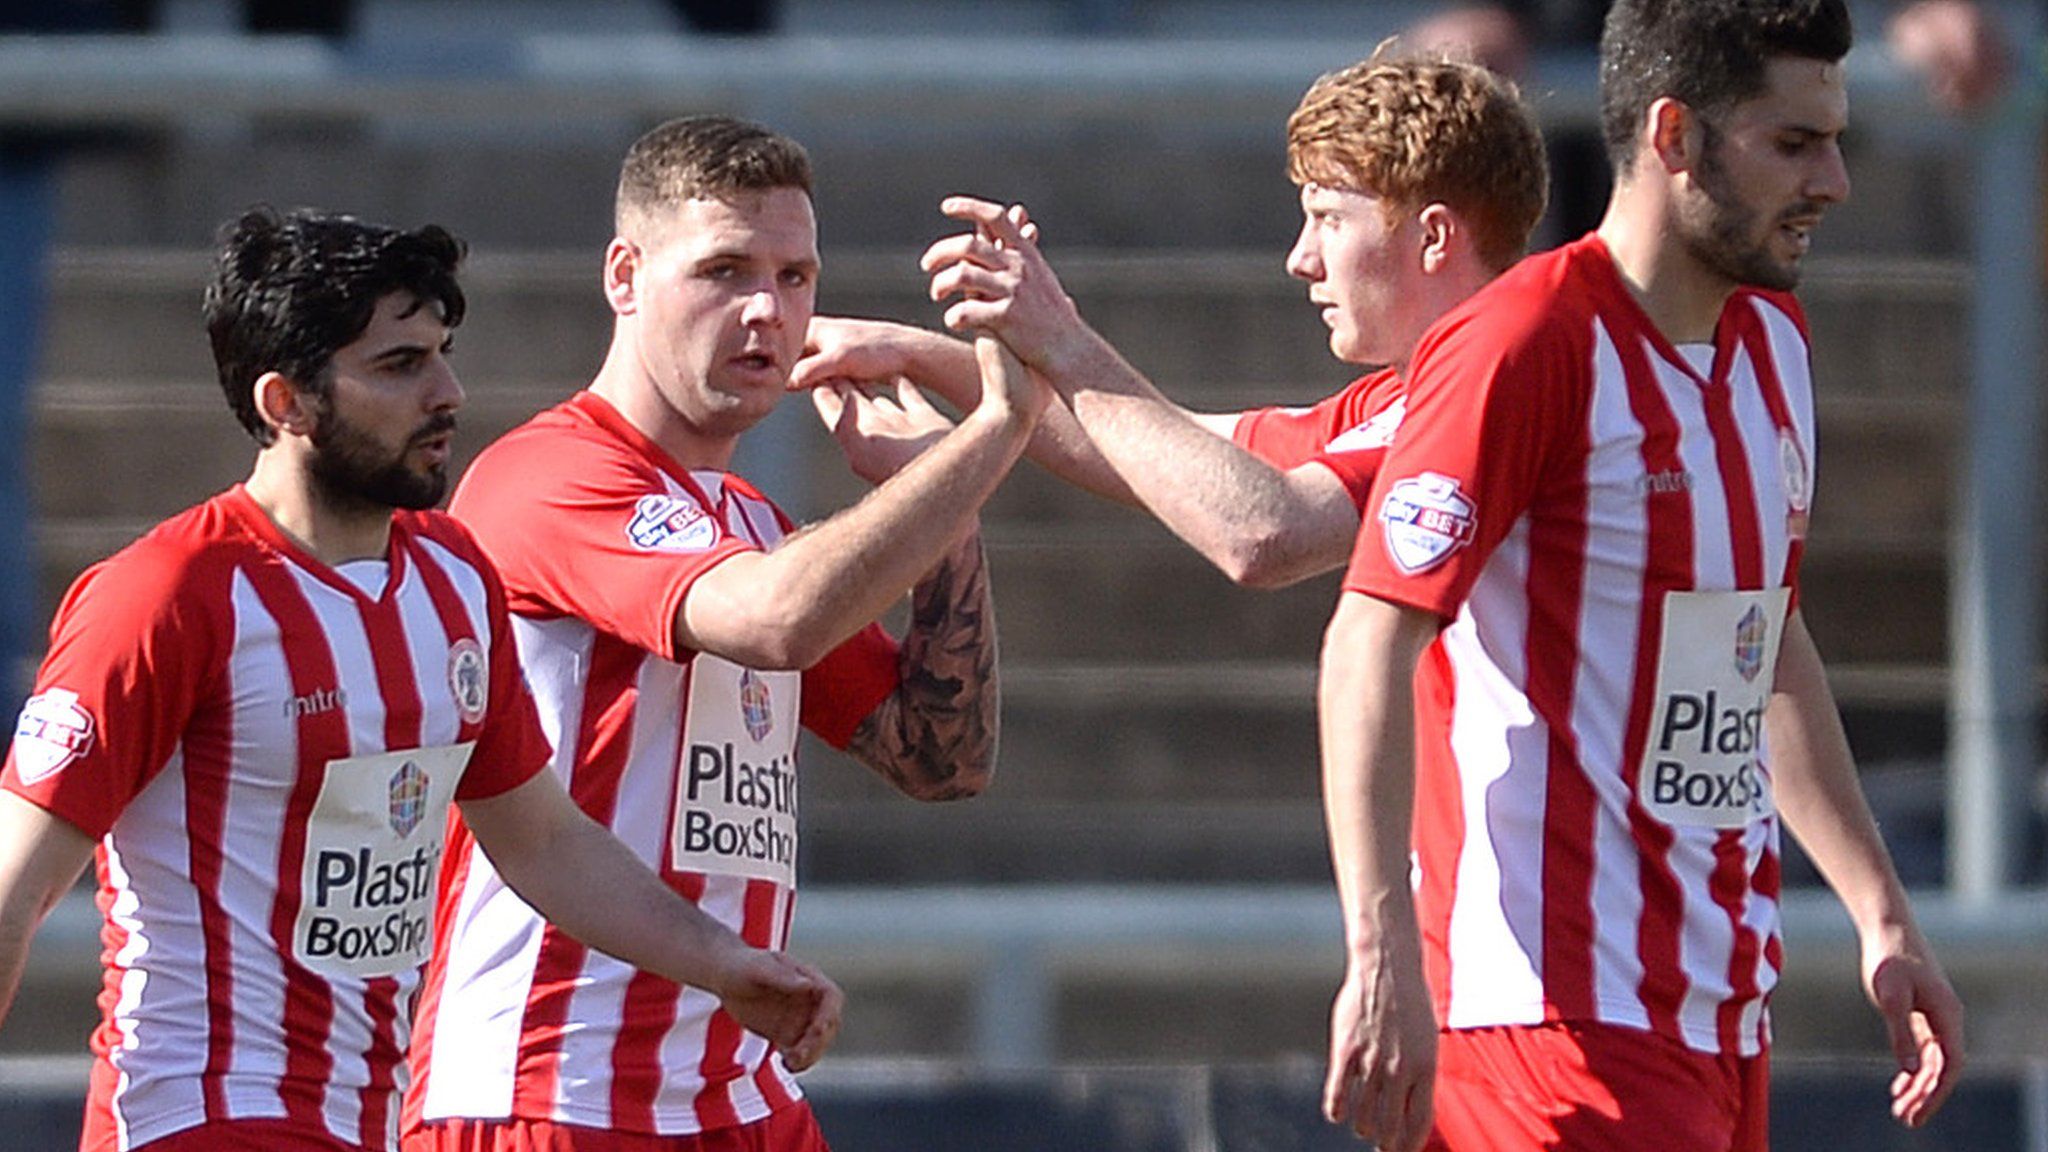 Accrington players celebrate after Billy Kee's goal